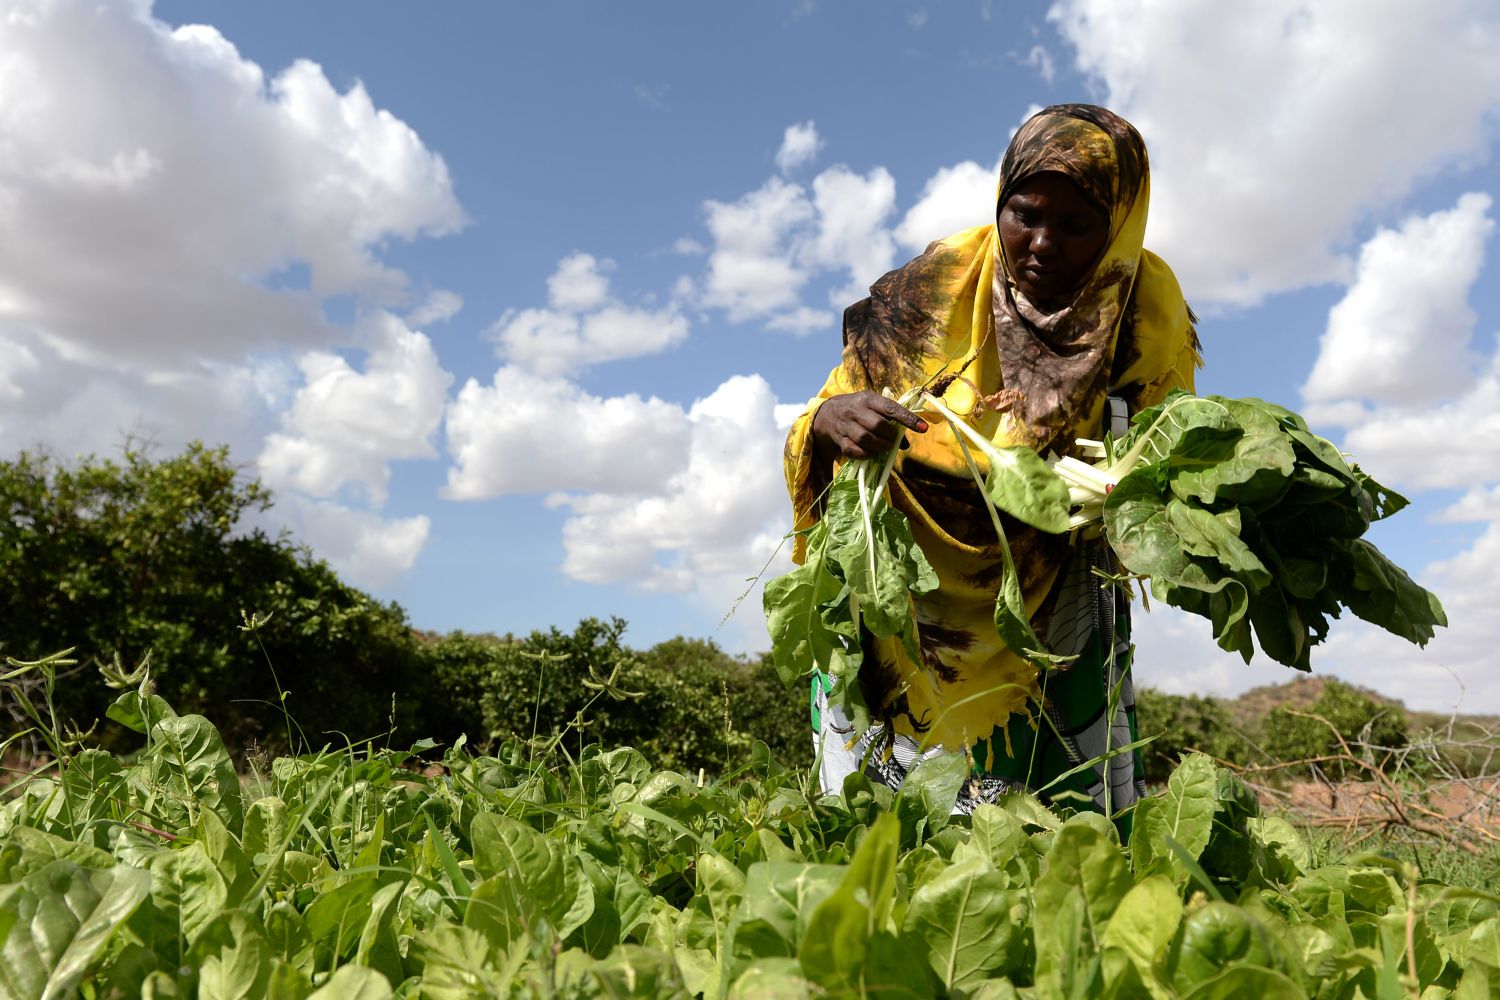 Maryan Hudun harvests spinach on her farm in the village of Ceel-Giniseed in Somaliland which is supported by charity ActionAid to enable farmers to provide water to livestock and crops.